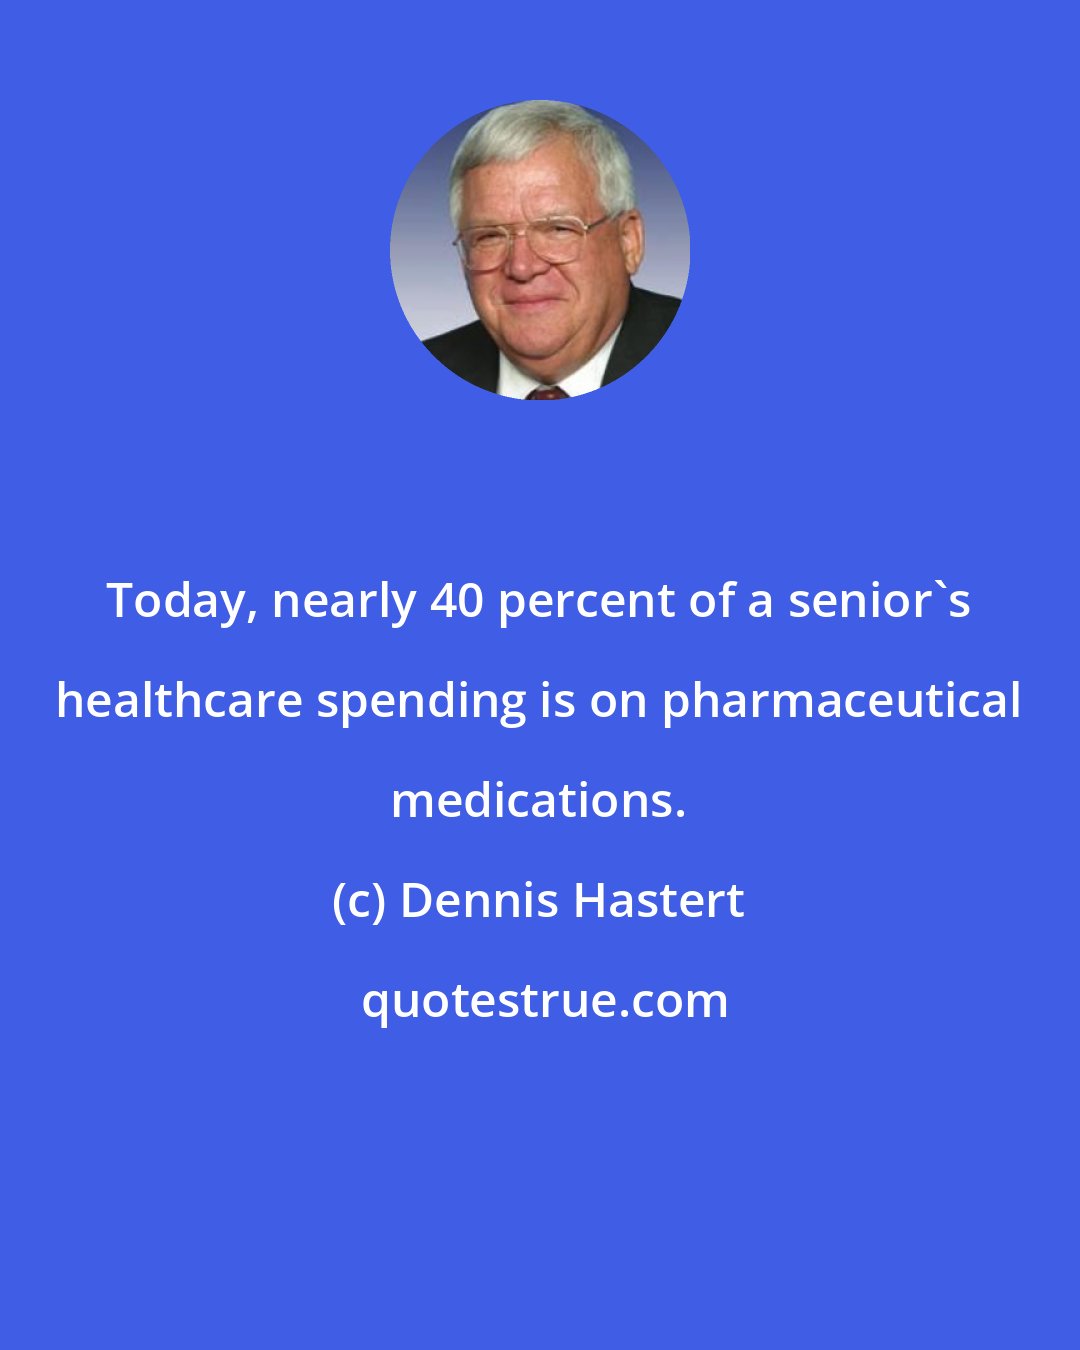 Dennis Hastert: Today, nearly 40 percent of a senior's healthcare spending is on pharmaceutical medications.